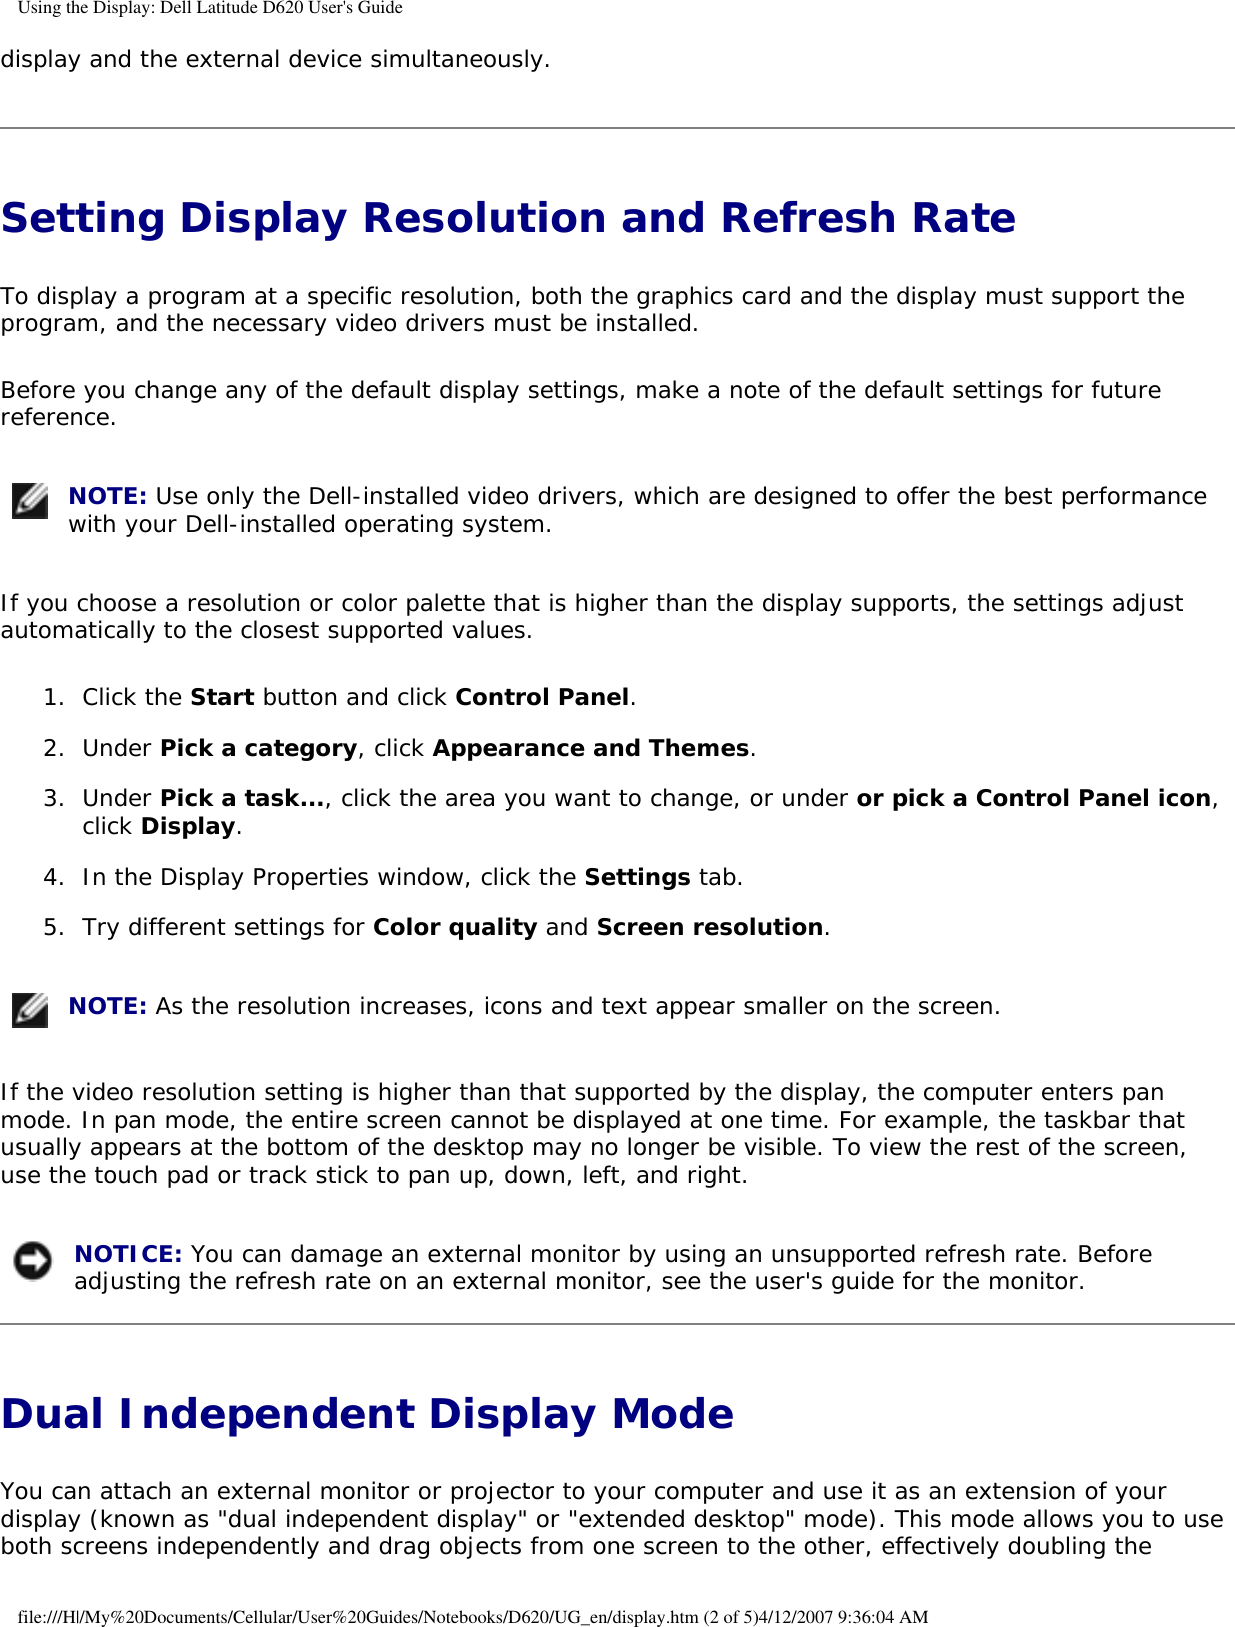 Using the Display: Dell Latitude D620 User&apos;s Guidedisplay and the external device simultaneously.Setting Display Resolution and Refresh Rate To display a program at a specific resolution, both the graphics card and the display must support the program, and the necessary video drivers must be installed.Before you change any of the default display settings, make a note of the default settings for future reference. NOTE: Use only the Dell-installed video drivers, which are designed to offer the best performance with your Dell-installed operating system.If you choose a resolution or color palette that is higher than the display supports, the settings adjust automatically to the closest supported values.1.  Click the Start button and click Control Panel.   2.  Under Pick a category, click Appearance and Themes.   3.  Under Pick a task..., click the area you want to change, or under or pick a Control Panel icon, click Display.   4.  In the Display Properties window, click the Settings tab.   5.  Try different settings for Color quality and Screen resolution.    NOTE: As the resolution increases, icons and text appear smaller on the screen.If the video resolution setting is higher than that supported by the display, the computer enters pan mode. In pan mode, the entire screen cannot be displayed at one time. For example, the taskbar that usually appears at the bottom of the desktop may no longer be visible. To view the rest of the screen, use the touch pad or track stick to pan up, down, left, and right. NOTICE: You can damage an external monitor by using an unsupported refresh rate. Before adjusting the refresh rate on an external monitor, see the user&apos;s guide for the monitor.Dual Independent Display Mode You can attach an external monitor or projector to your computer and use it as an extension of your display (known as &quot;dual independent display&quot; or &quot;extended desktop&quot; mode). This mode allows you to use both screens independently and drag objects from one screen to the other, effectively doubling the file:///H|/My%20Documents/Cellular/User%20Guides/Notebooks/D620/UG_en/display.htm (2 of 5)4/12/2007 9:36:04 AM